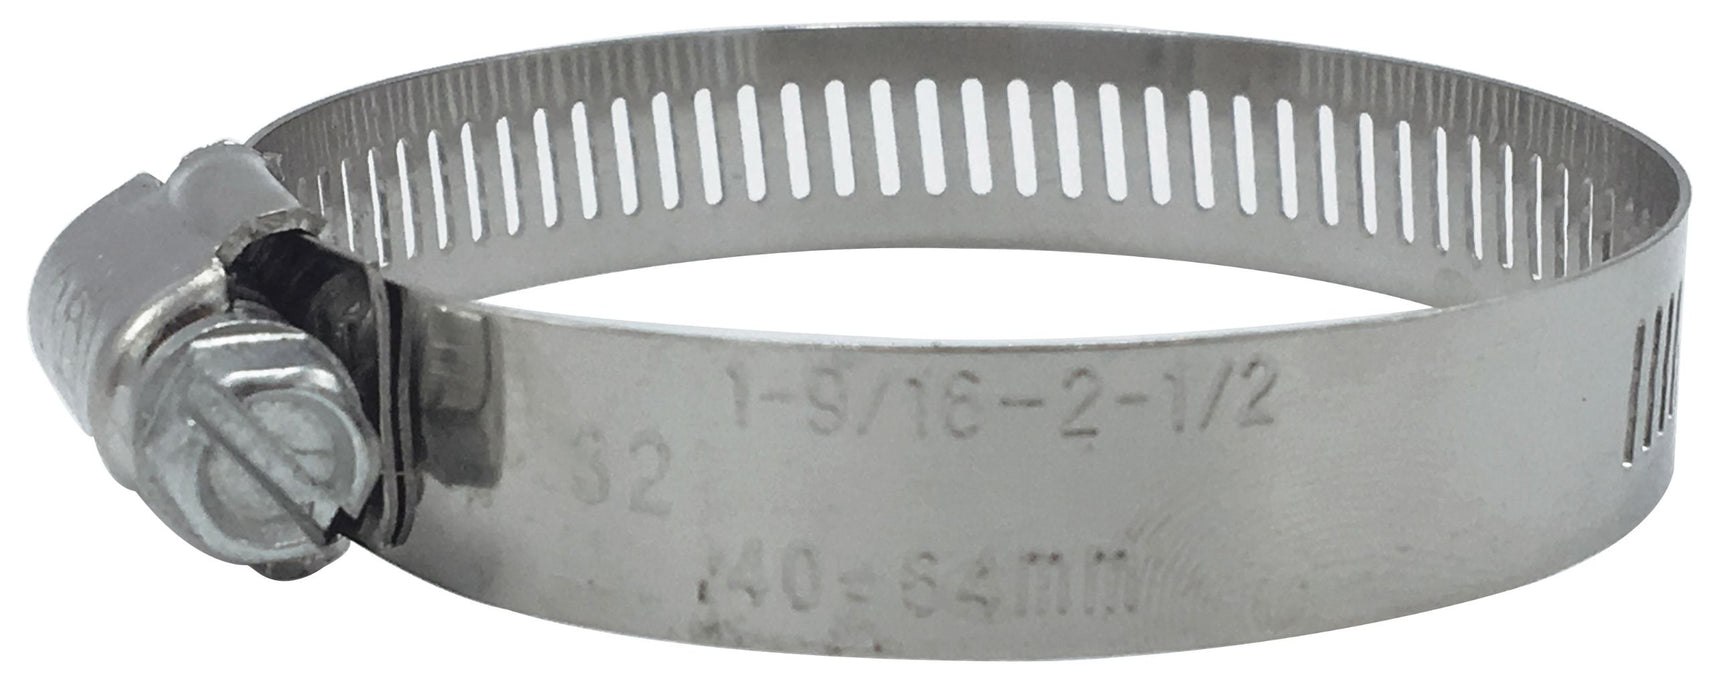 #36 2" Stainless Hose Clamp With Carbon Screw